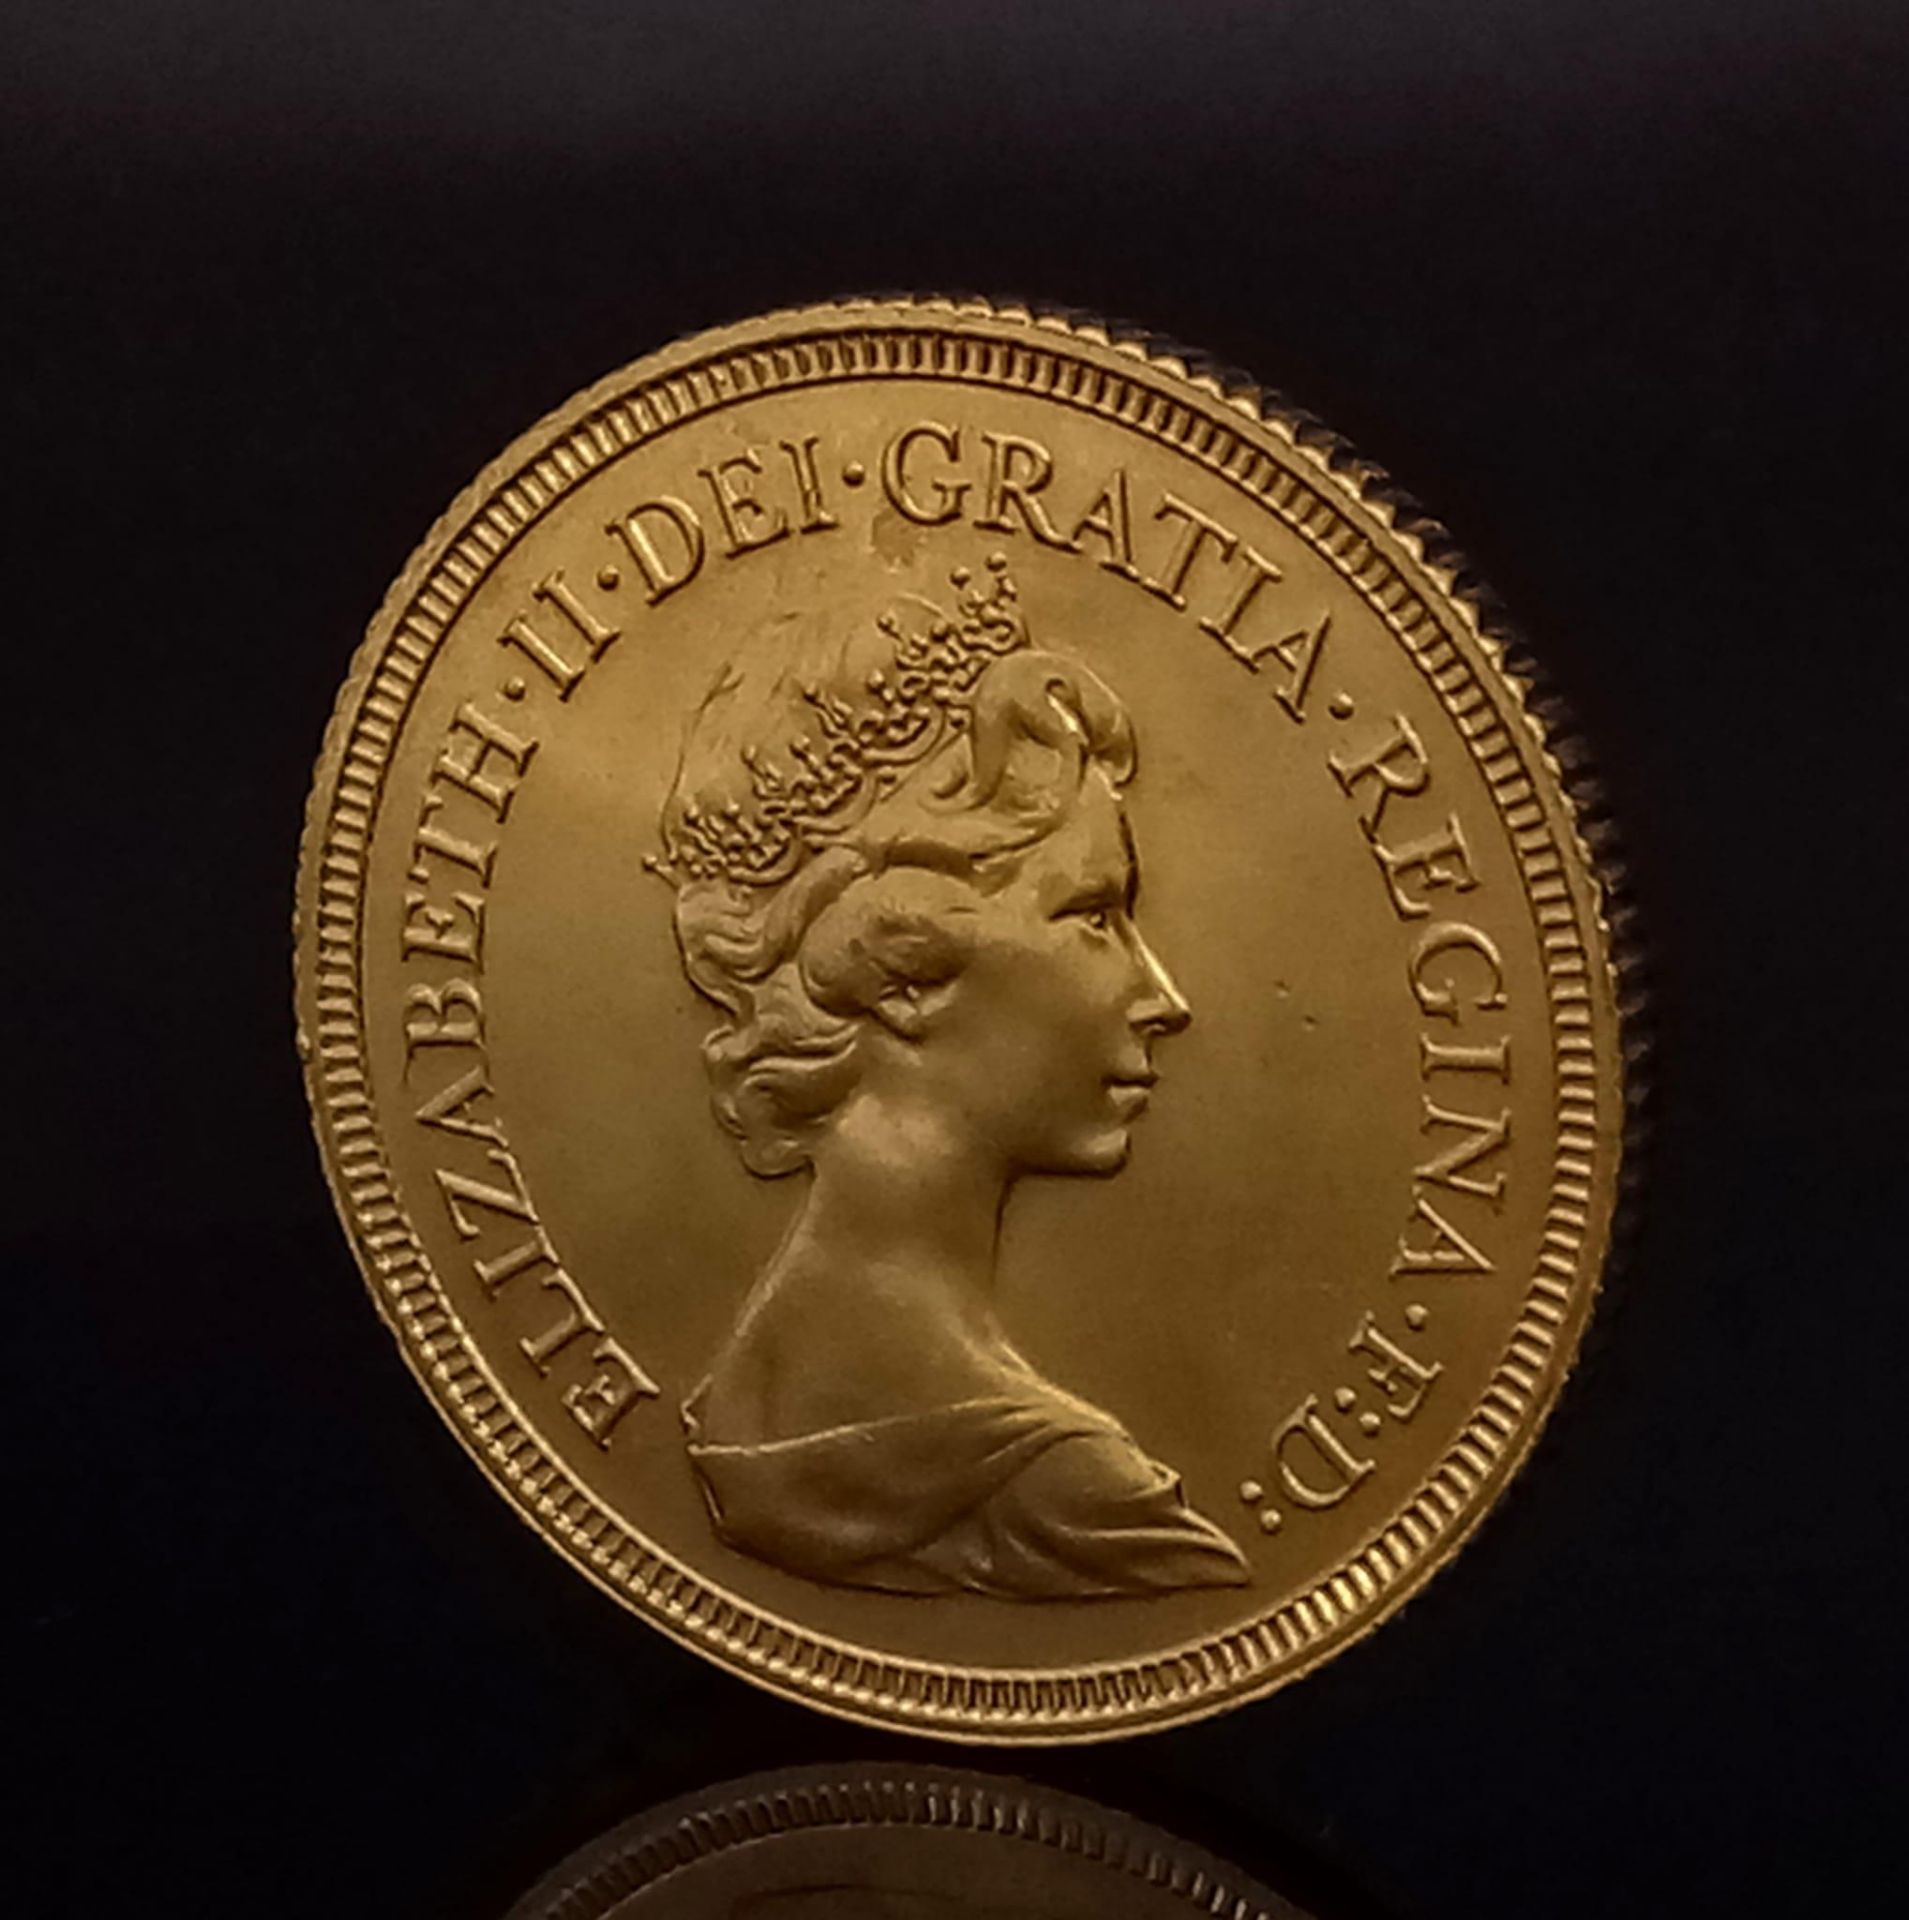 A 1981 22k Gold Elizabeth II Full Sovereign. Comes in original case. EF but please see photos. - Image 2 of 4